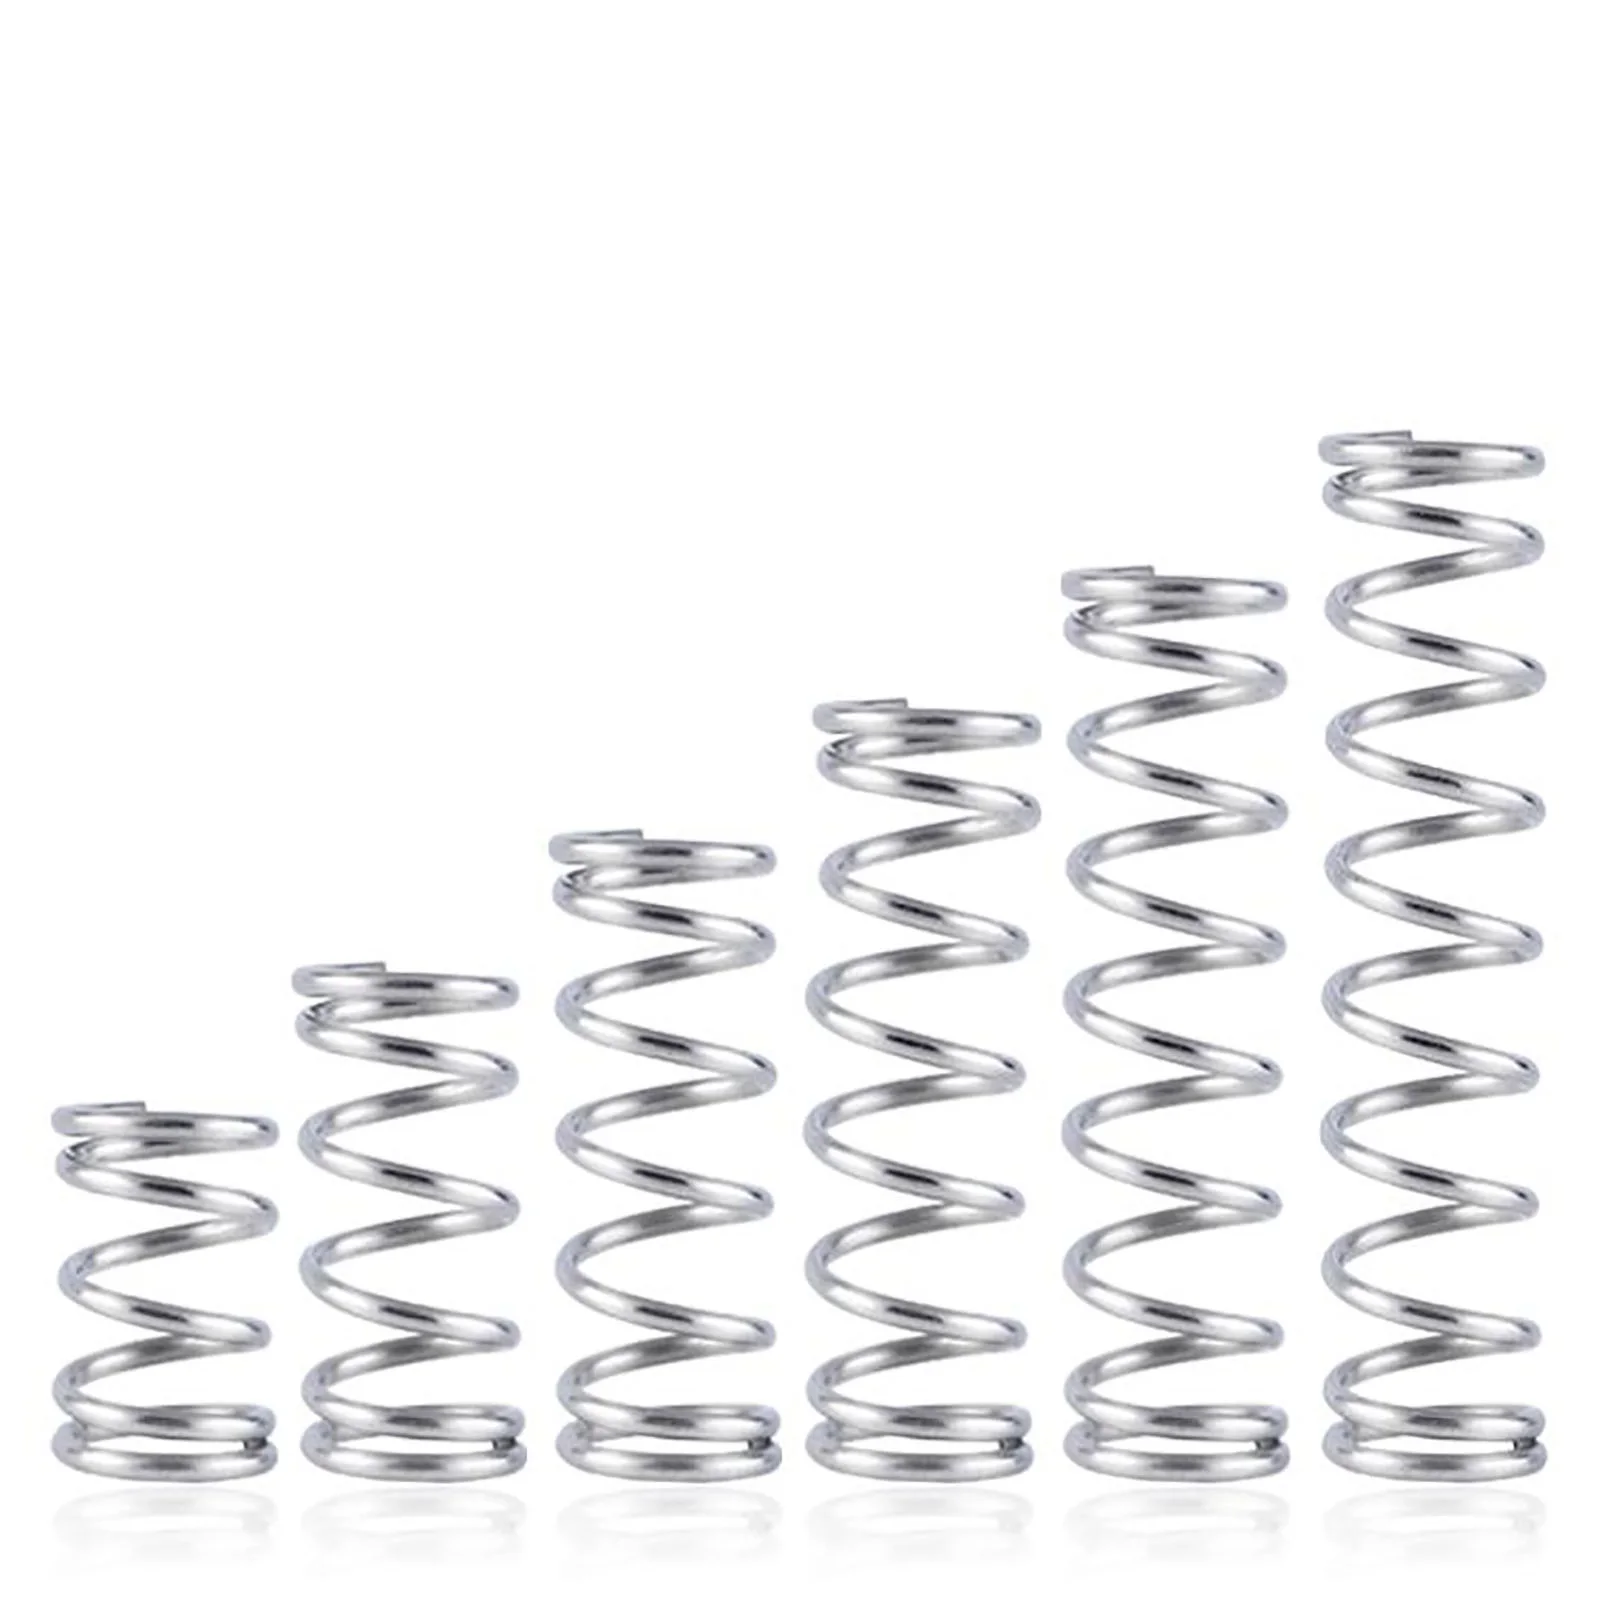 

1.4x10mm Compression Spring, 1.4mm Wire Diameter, 10mm Outer Diameter, 10-50mm Free Length, Stainless Steel Compression Spring,